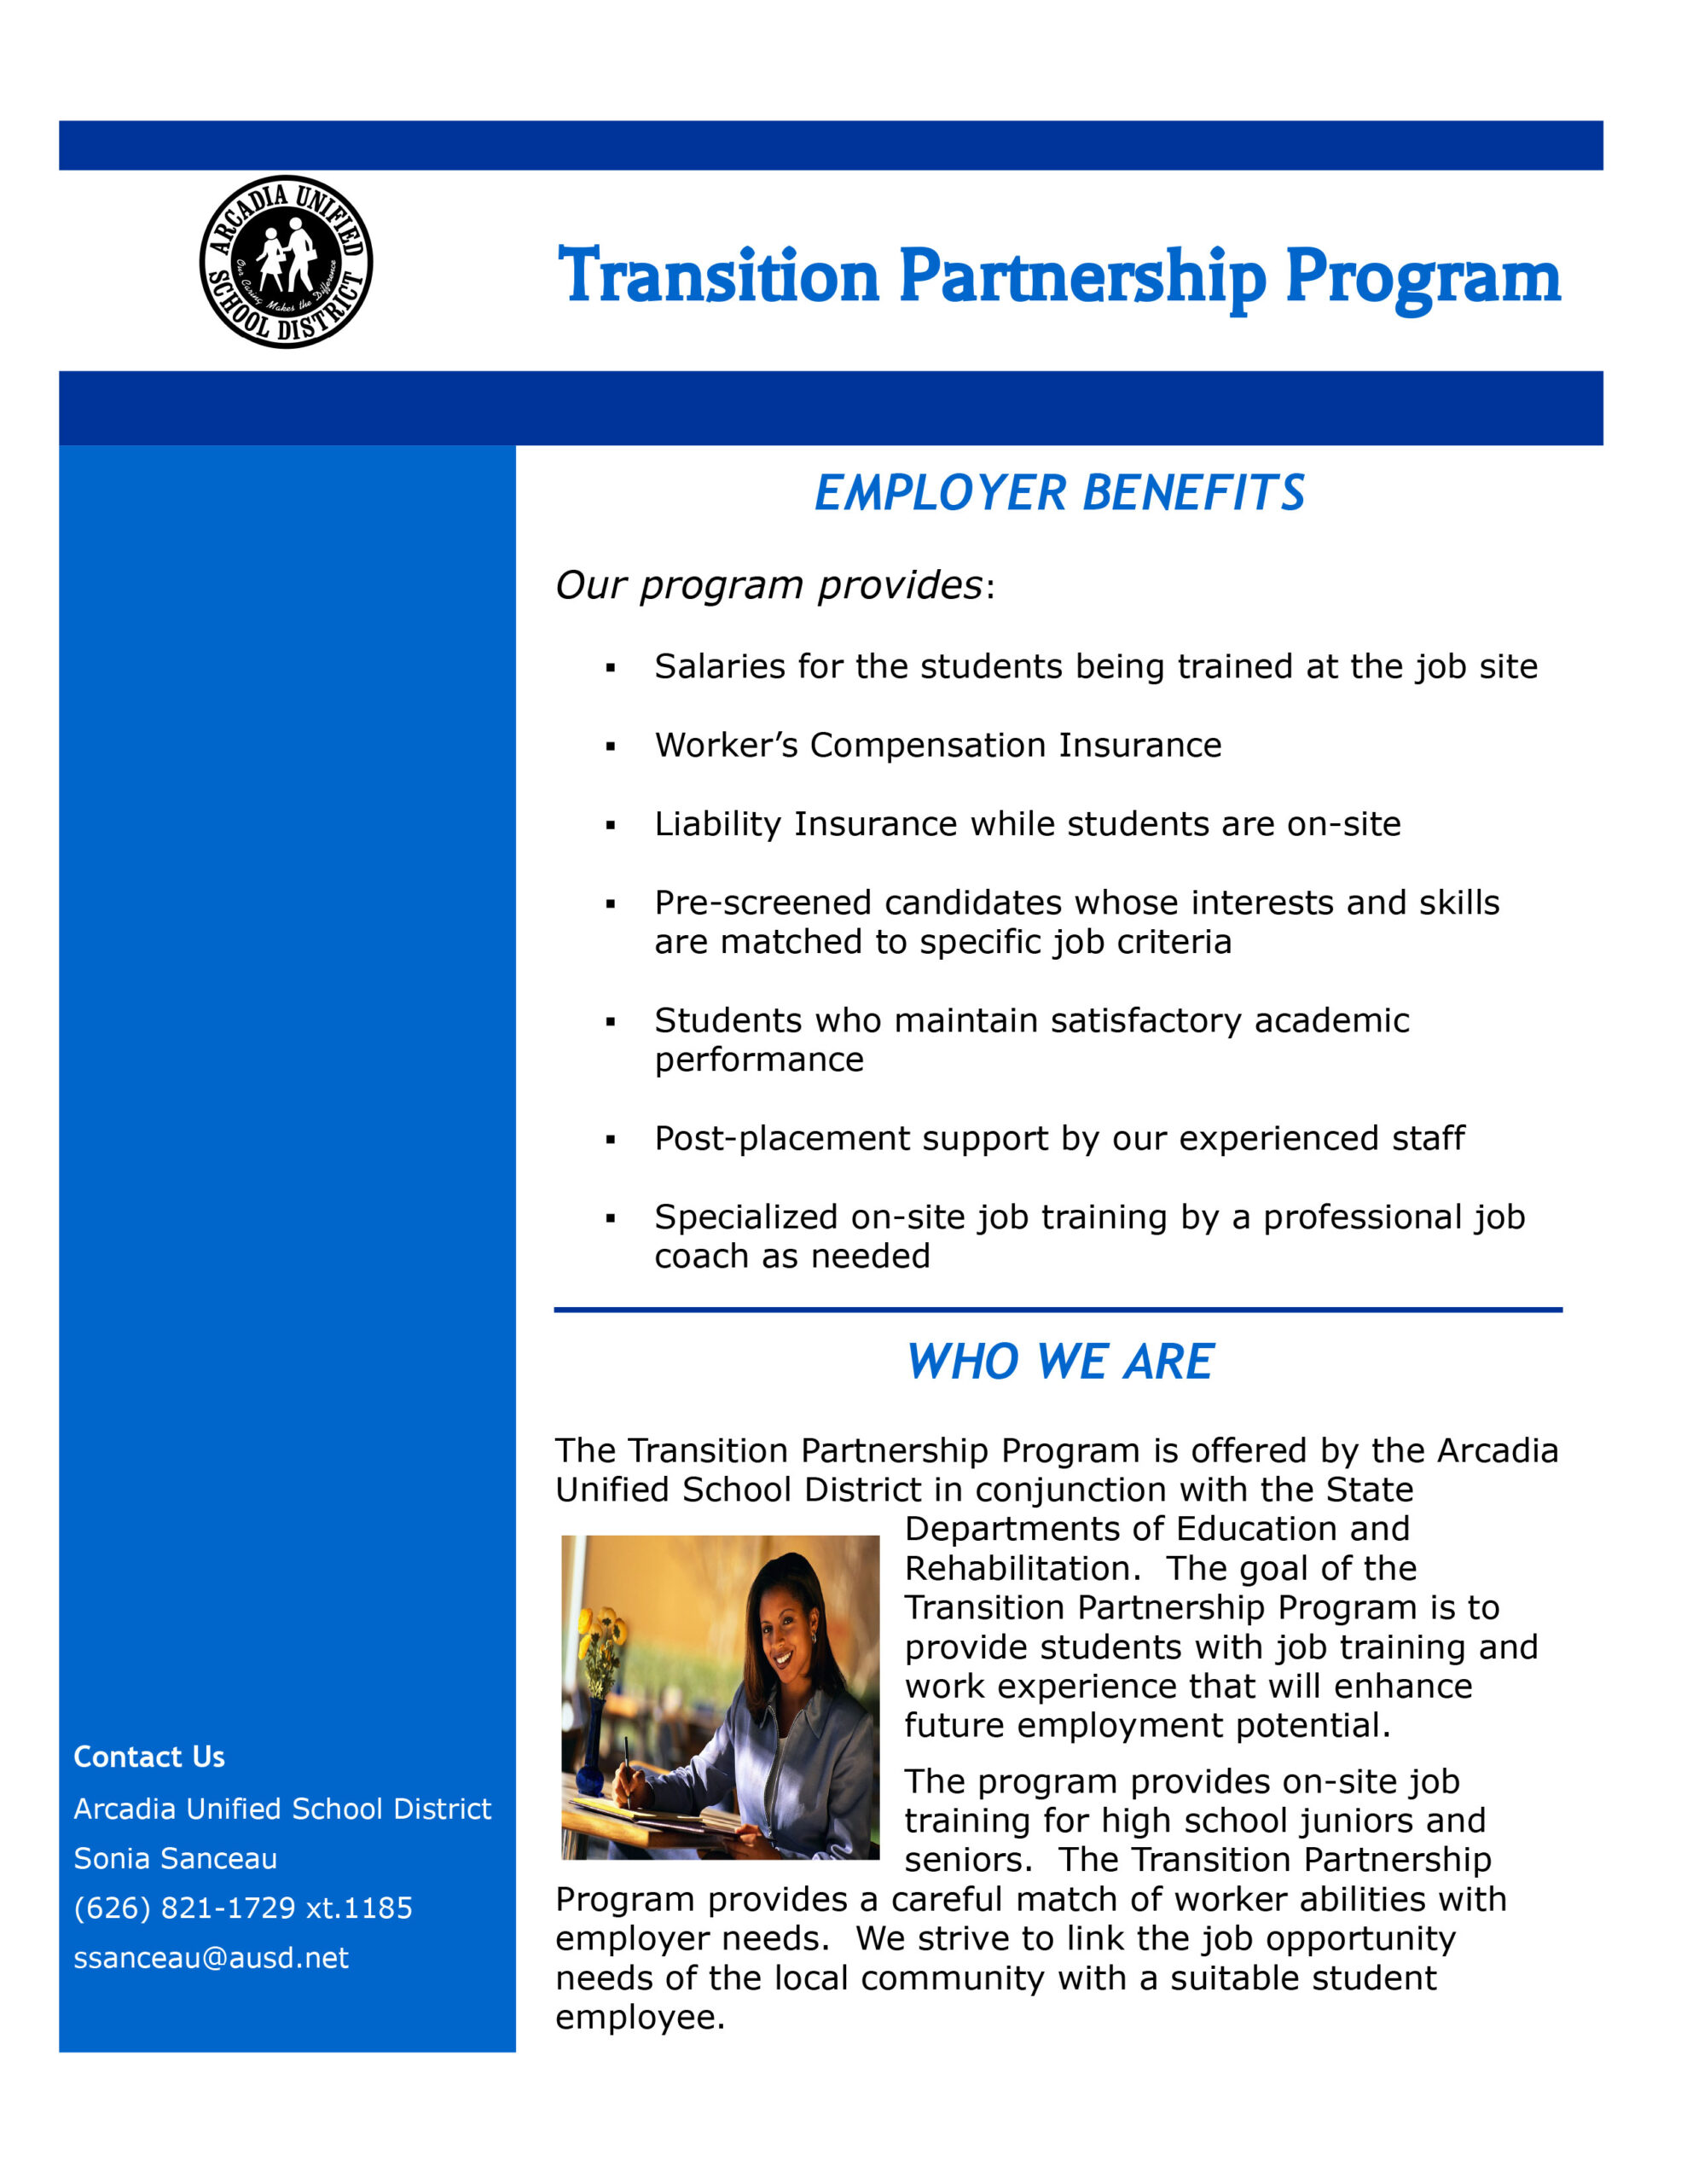  How to Support youth with TTP program at Arcadia Unified High School